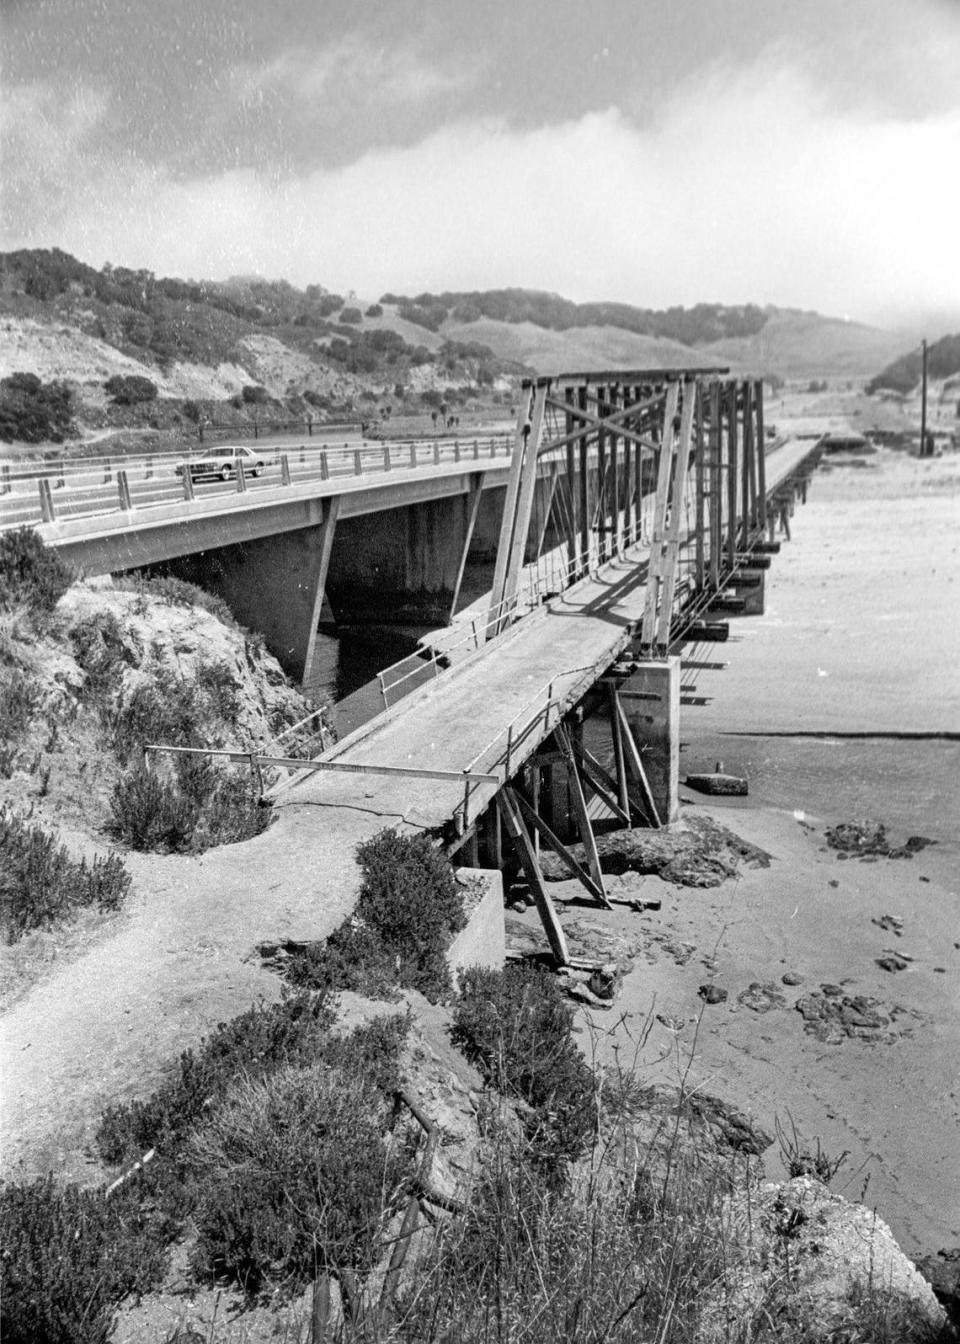 Built in 1881 the Pacific Coast Railway Bridge No. 5 was condemned and closed when it was photographed here June 26,1976. There was a proposal to use it with a bike trail but funding never was found. It collapsed in 1981. Recent storms have exposed the footings for the bridge over San Luis Creek.